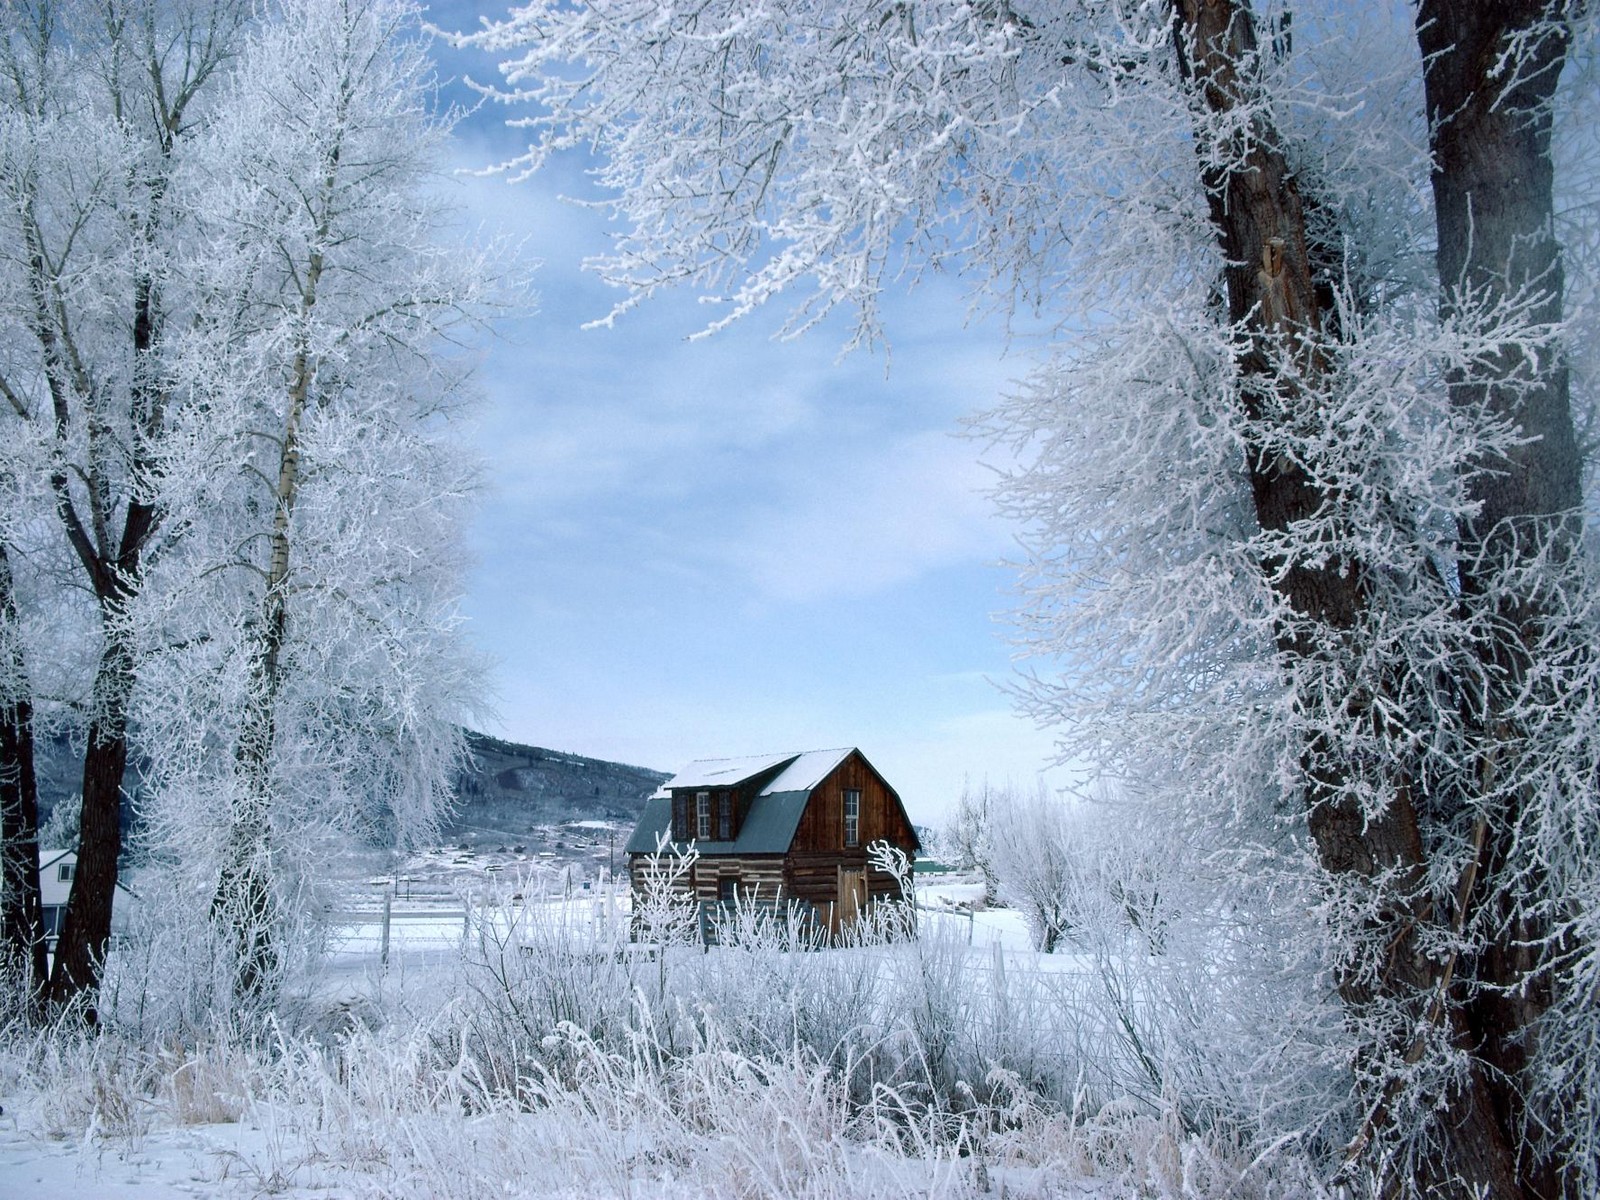 Summer cottage in the winter / 1600 x 1200 / Forest / Photography ...